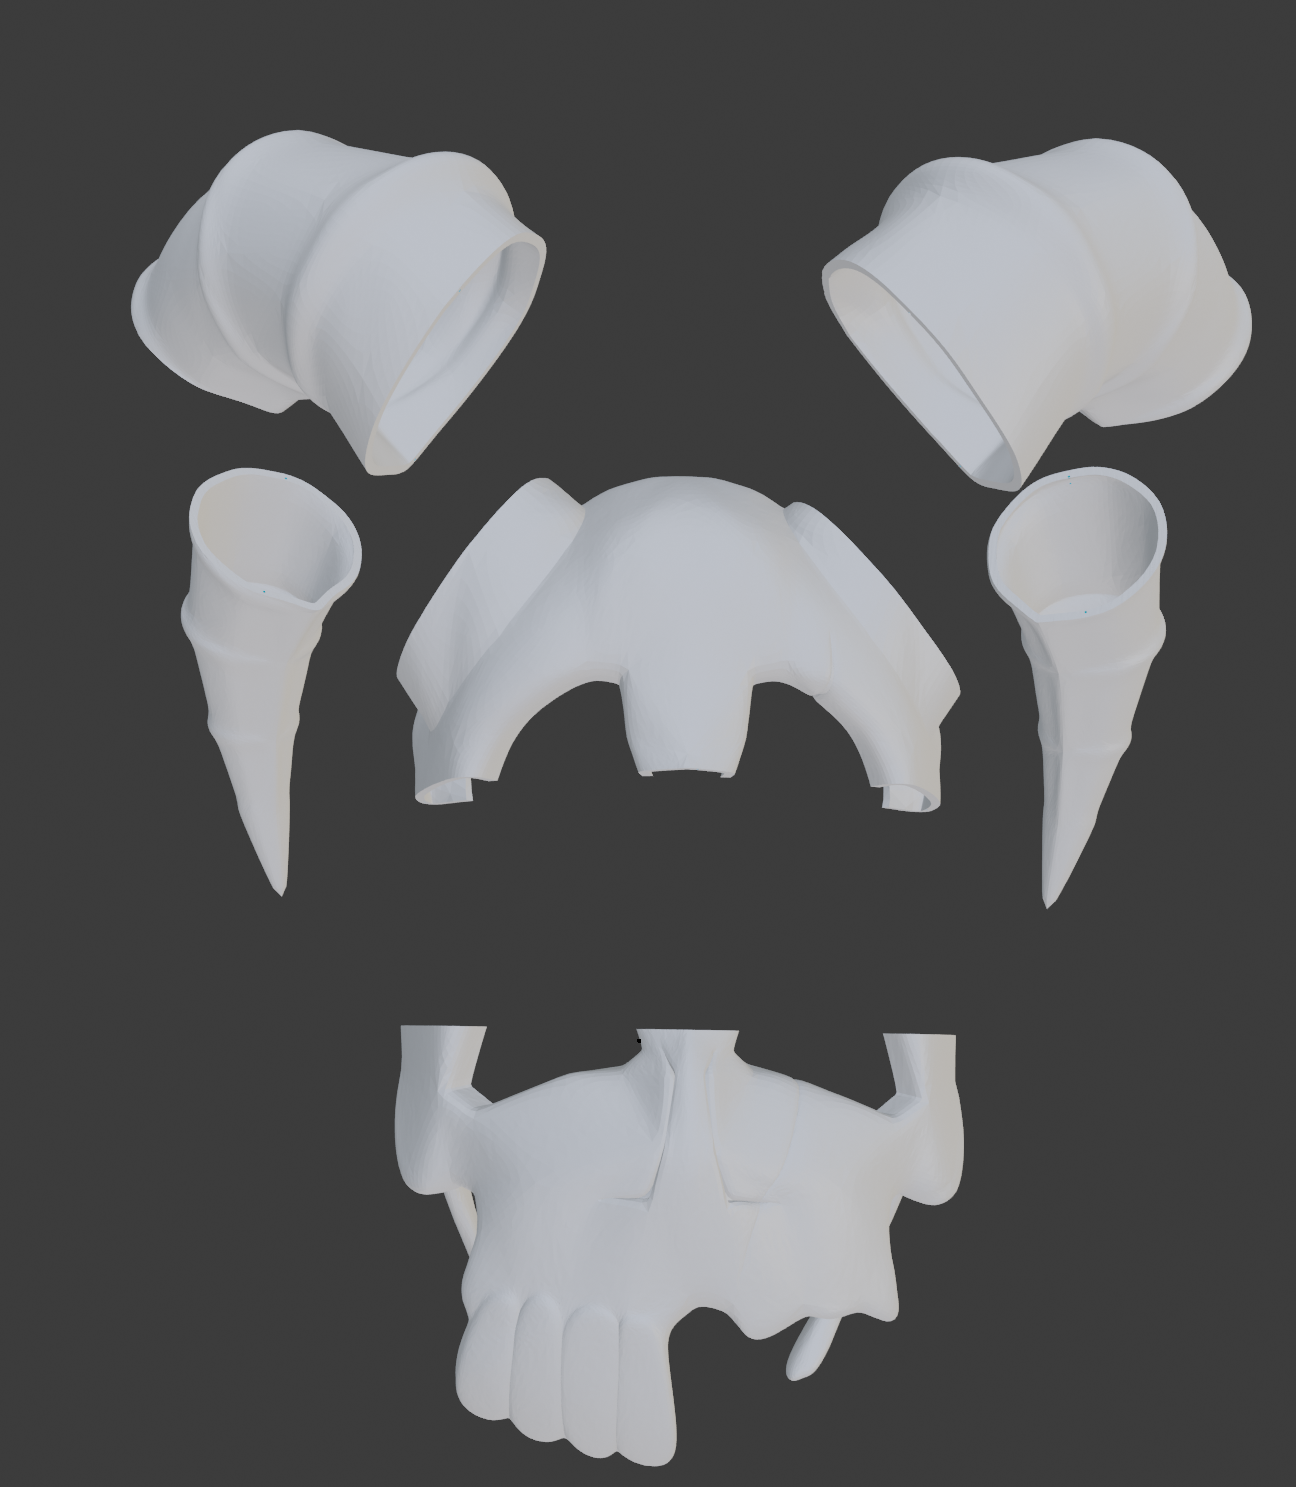 Nelliel Centaur Mask - Digital 3D Model and Physical 3D Printed Kit Options - Nelliel Cosplay